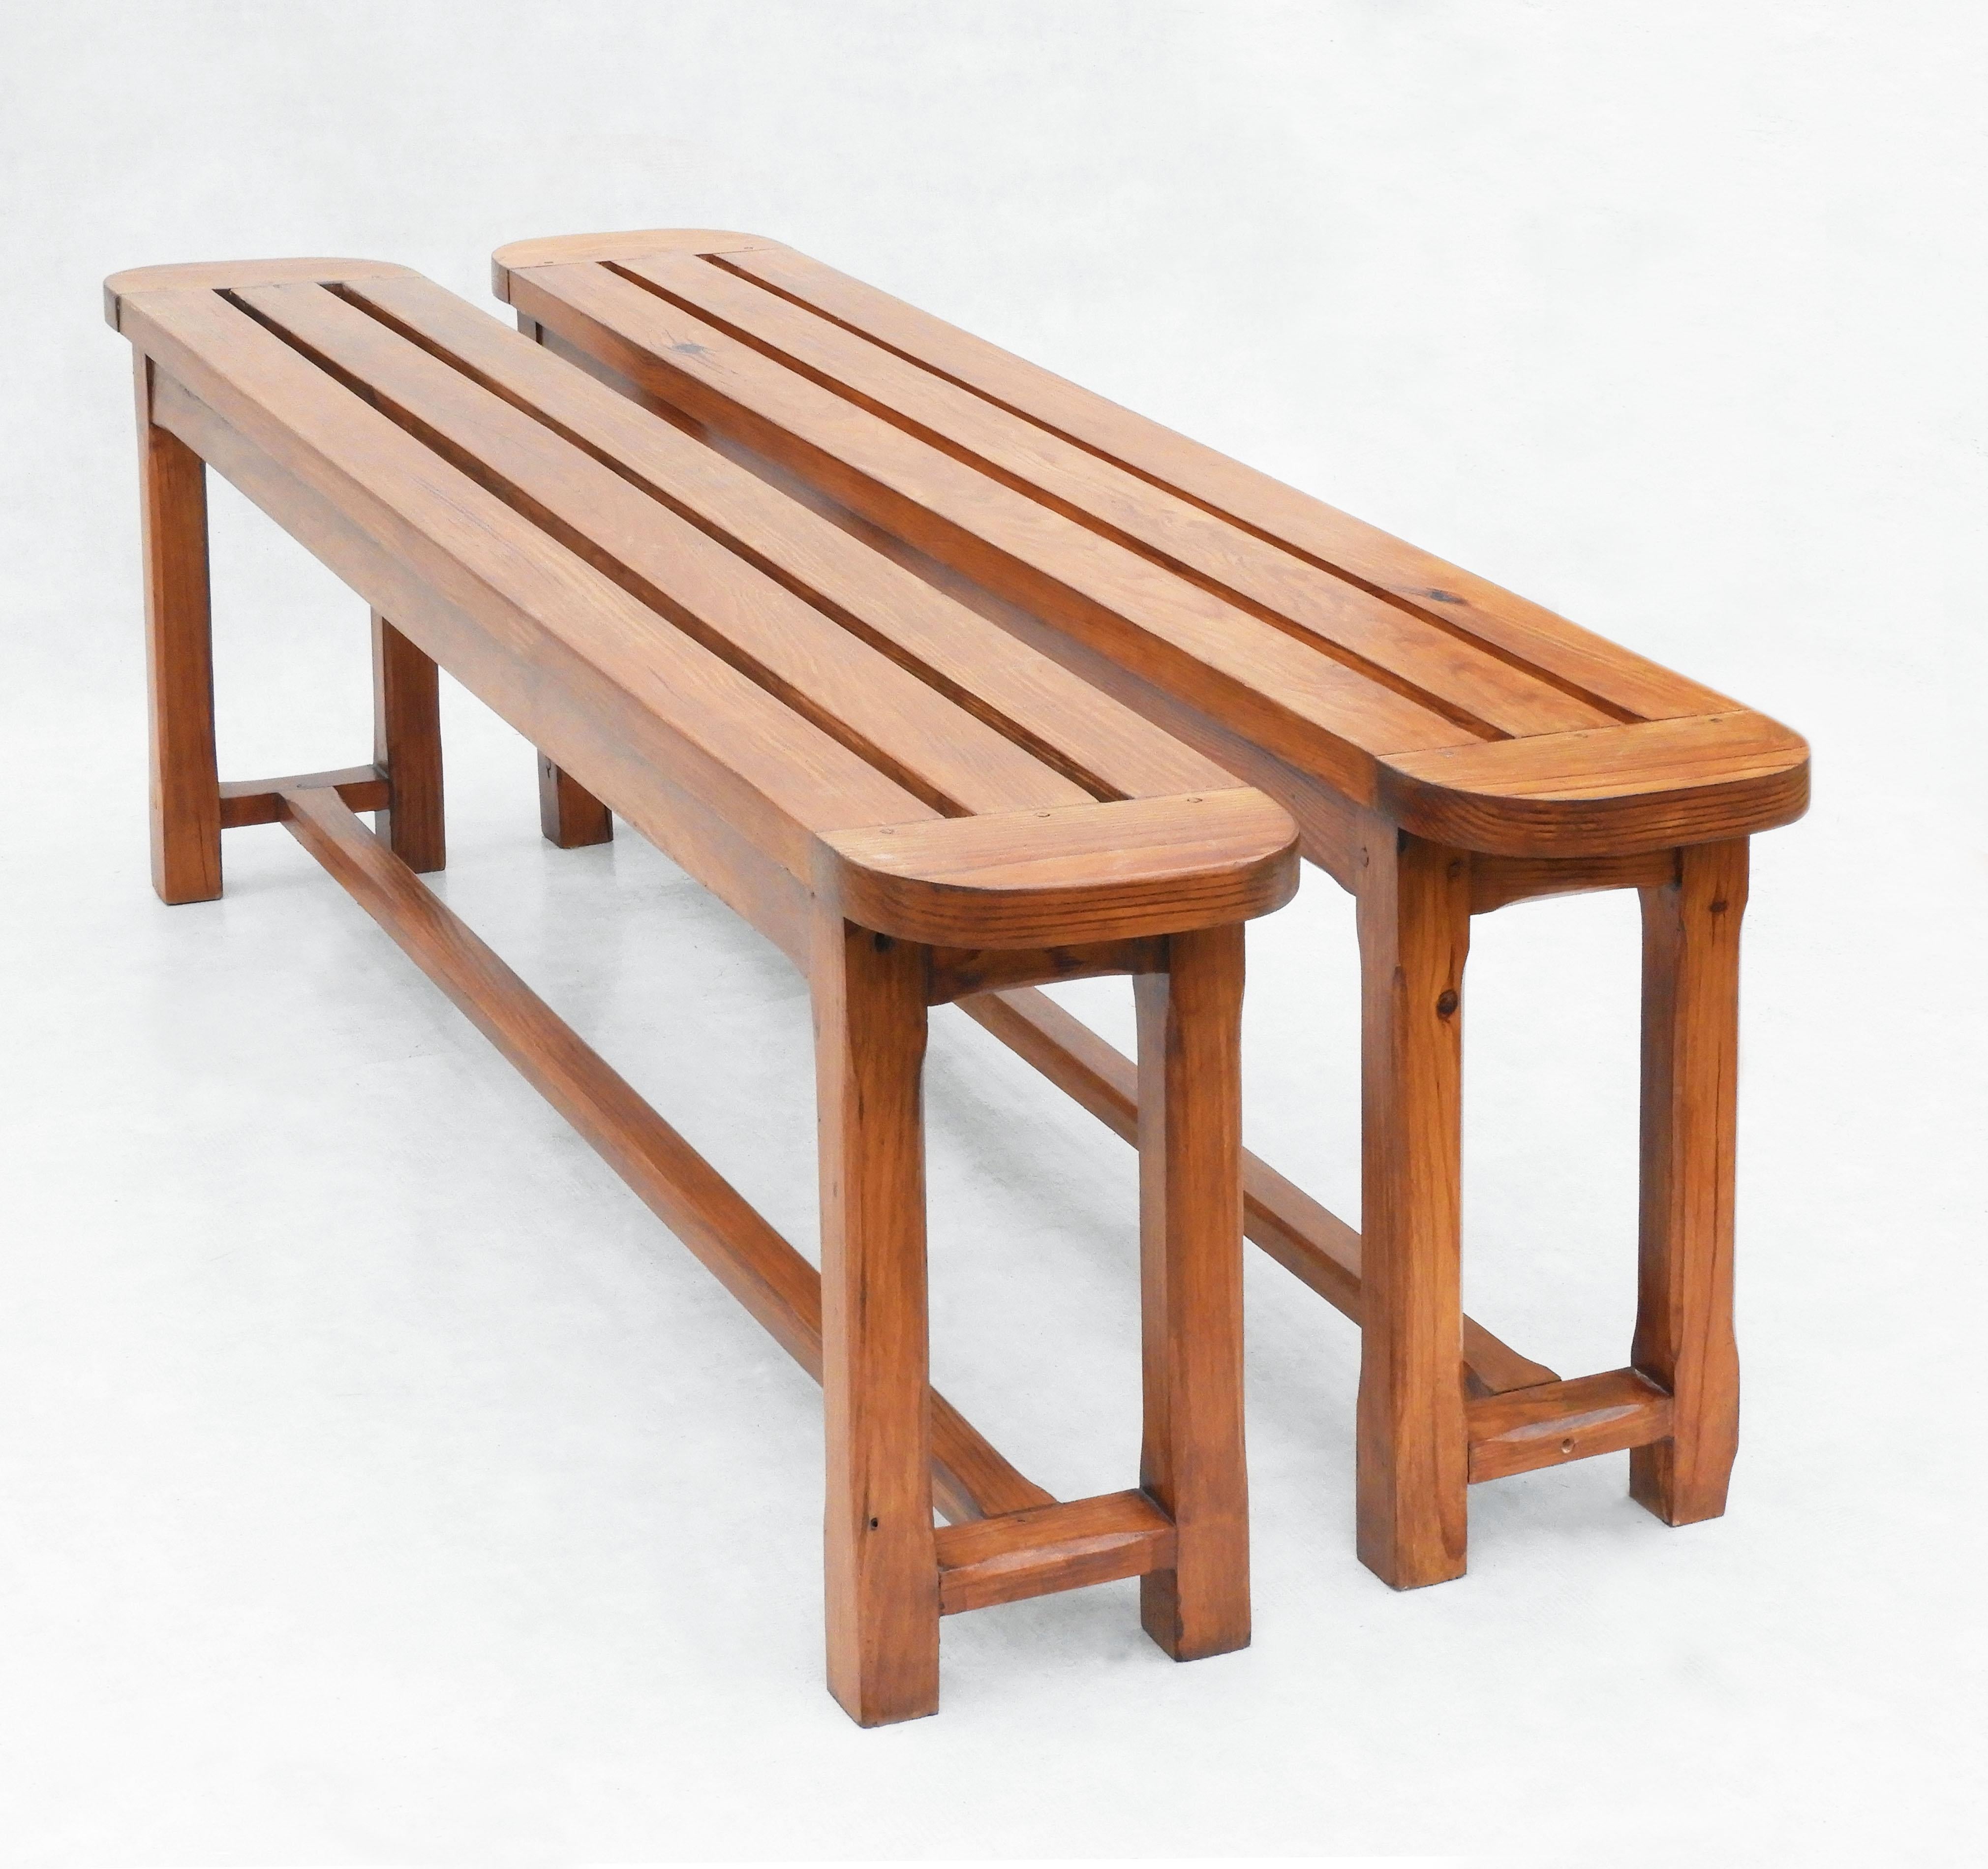 French Provincial pine benches from the South West region of France C1980.
These simple but stylish, artisan-made wooden 'bancs' sit easily in almost any setting. At over five feet long they sit three people comfortably.  Great for either side of a